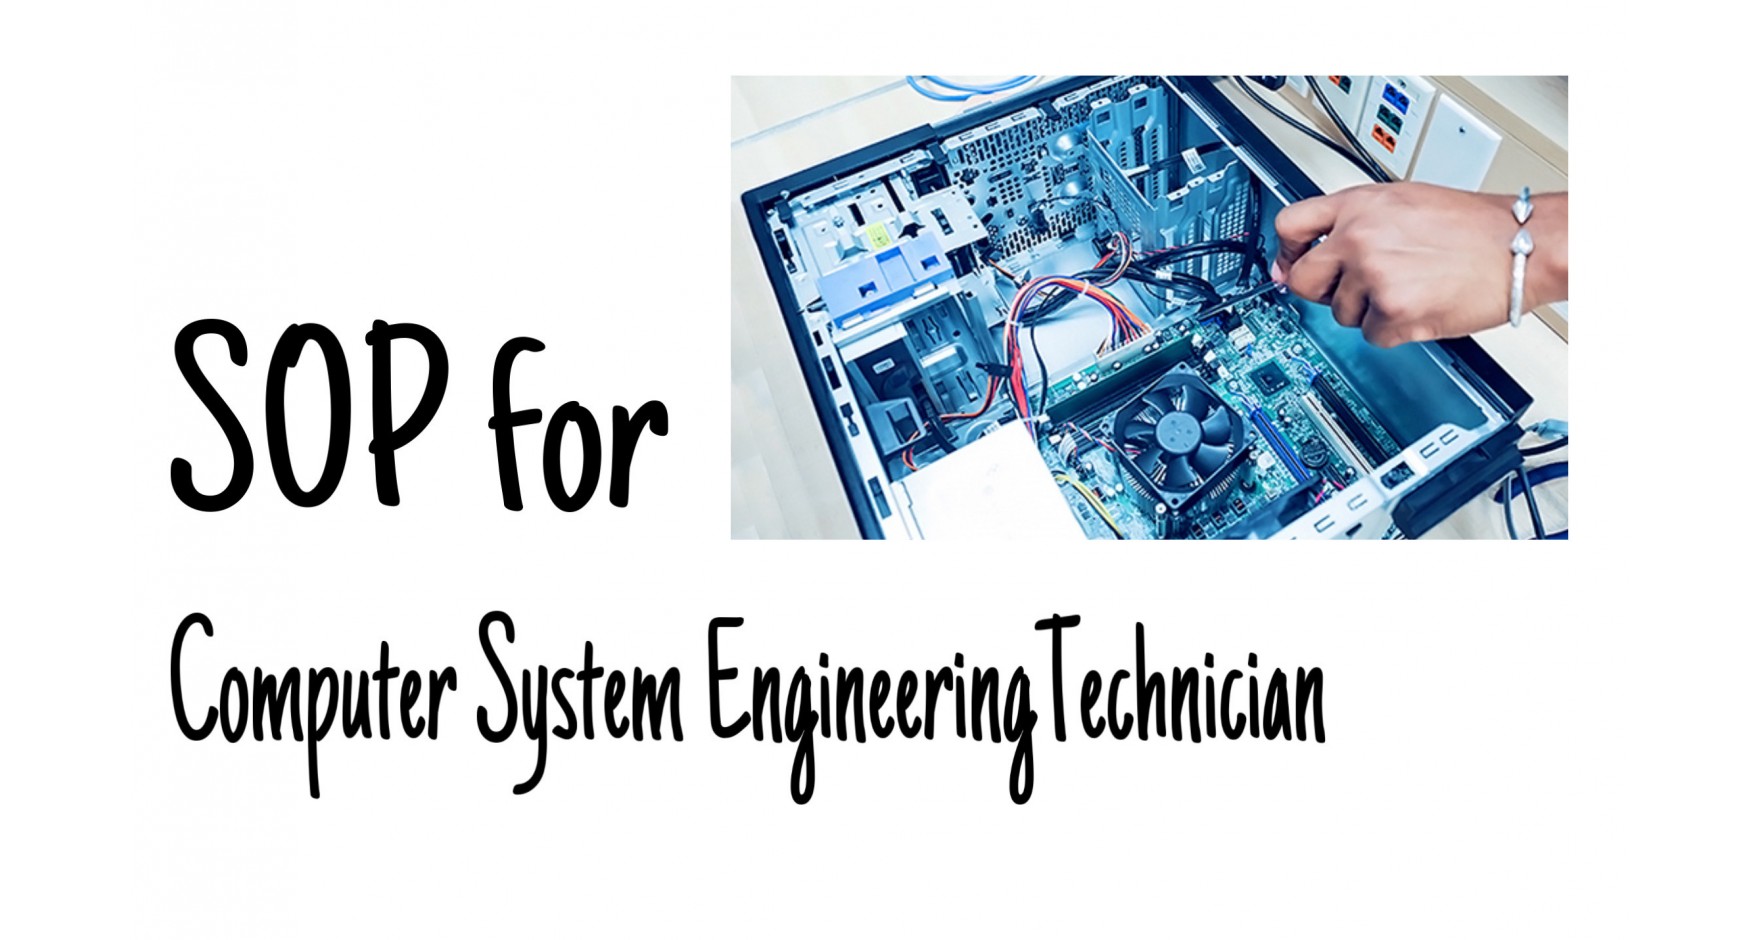 How to write SOP for Computer Systems Engineering Technician?